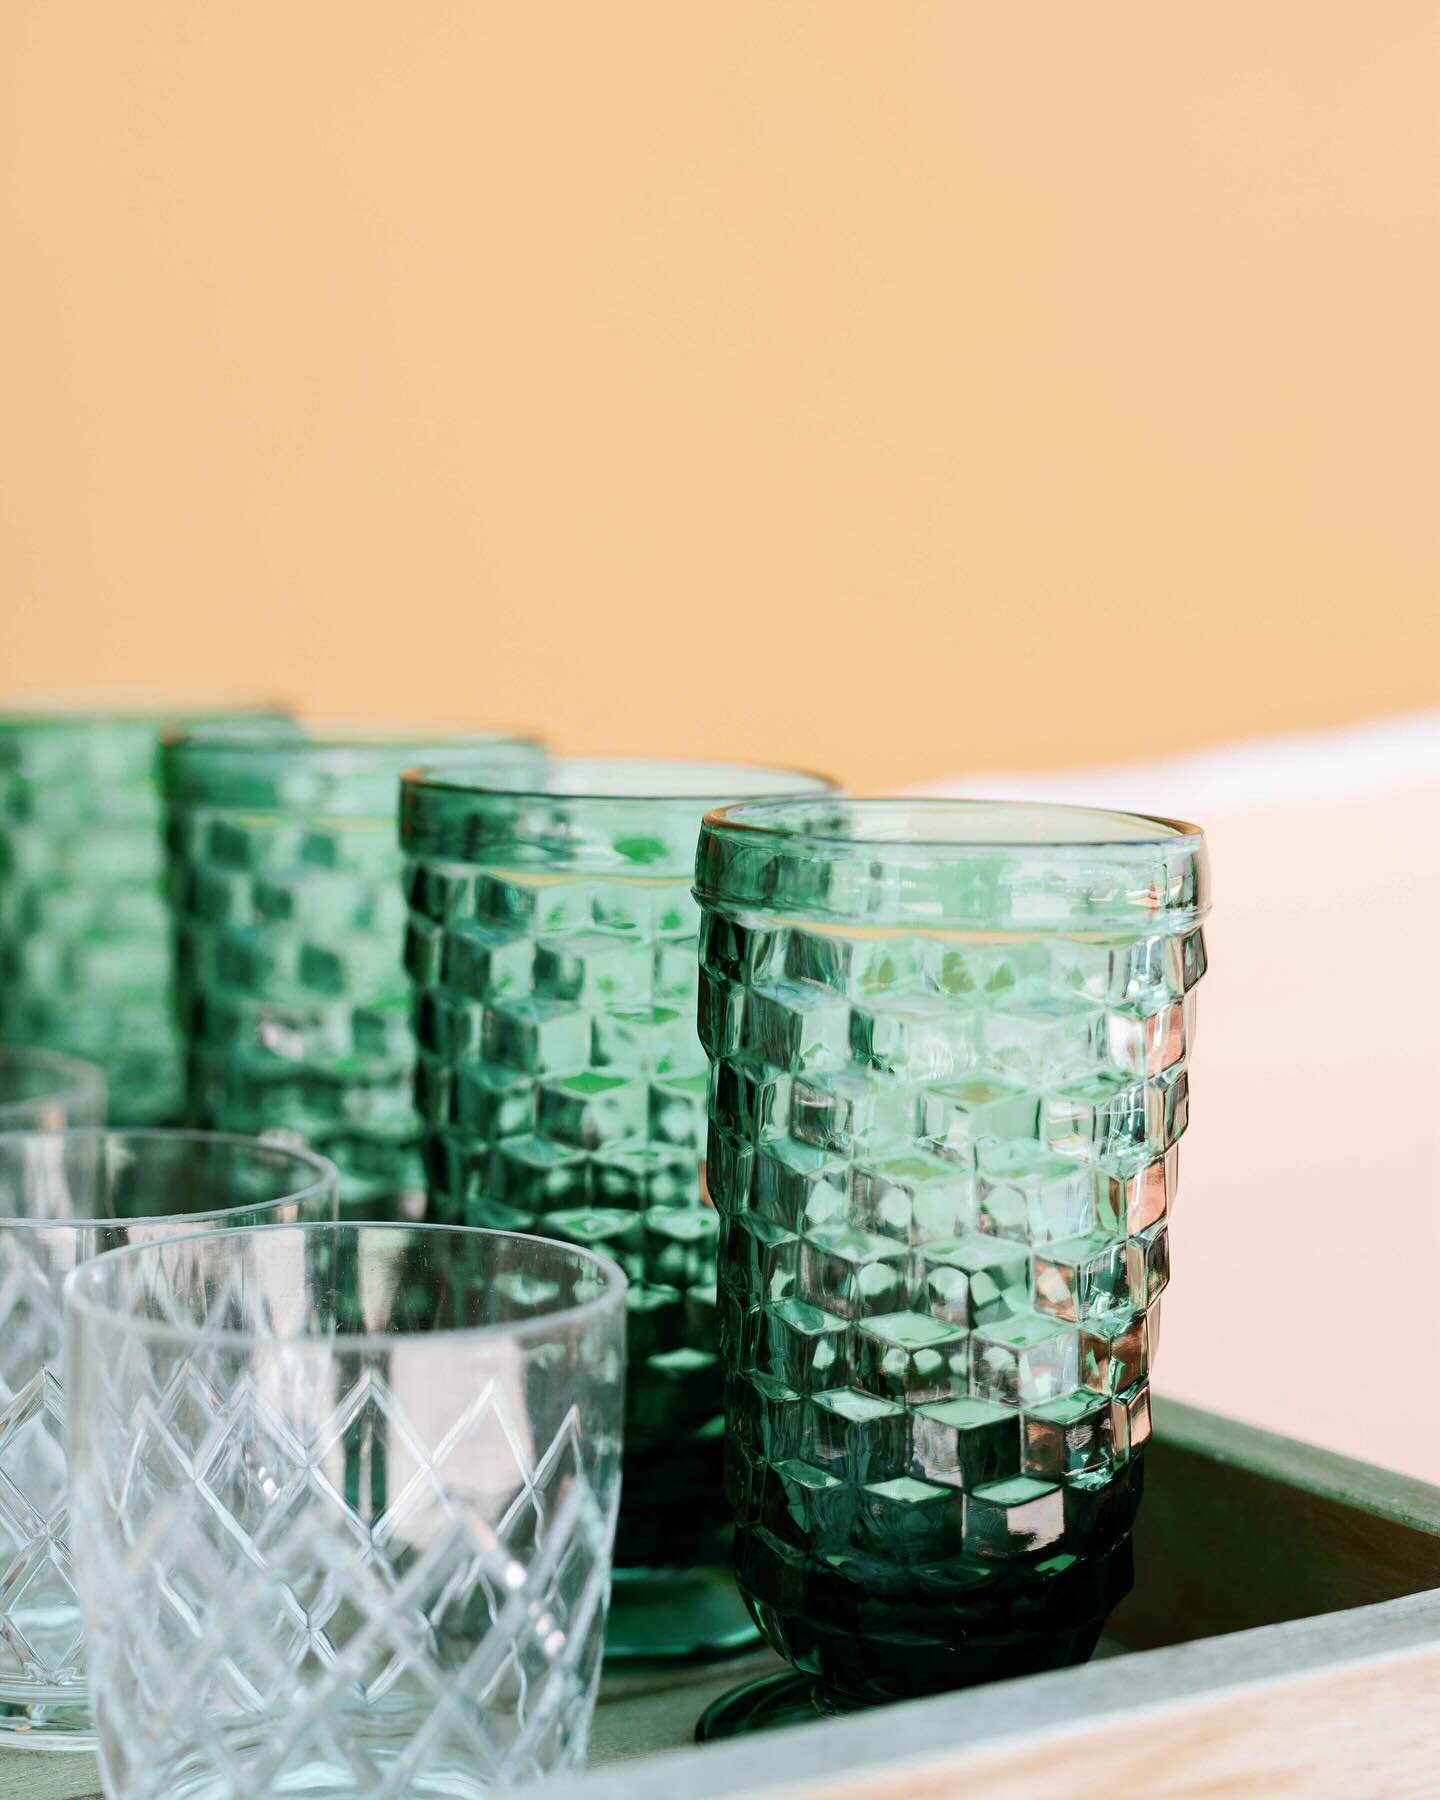 Our turquoise goblets are our new spotlight of the week  item and are renting for 25% off through 4/3. These pretties are a favorite anytime of year and bring a fun and fresh pop of color!

Every Wednesday through Spring we will be spotlighting a dif